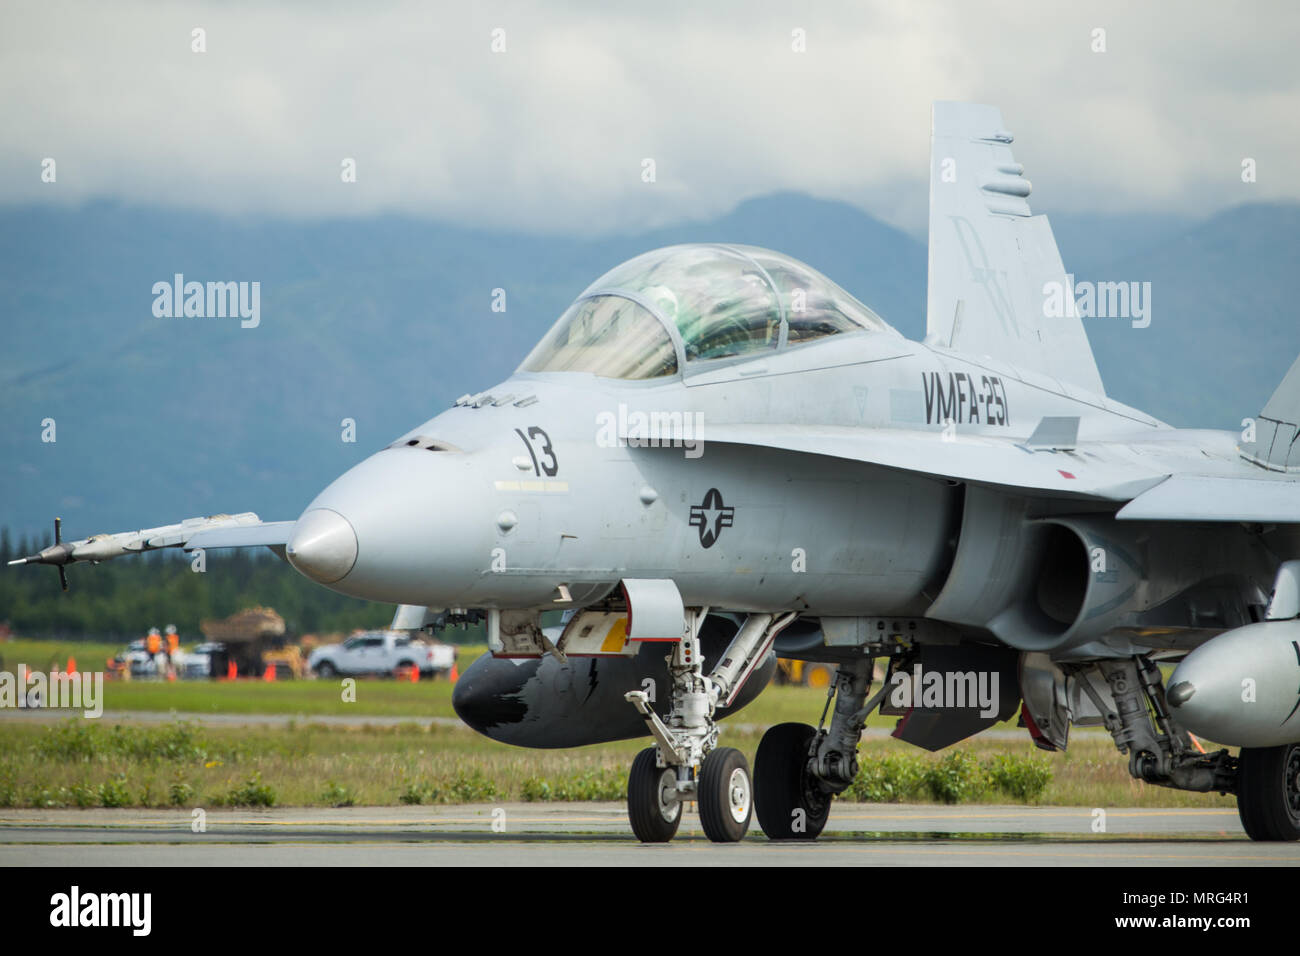 A U.S. Marine Corps F/A-18C Hornet with Marine Fighter Attack Squadron 251 taxis down a flightline during a joint training exercise Red Flag-Alaska 17-2 on Joint Base Elmendorf-Richardson, Alaska, June 13, 2017. Red Flag-Alaska provides an optimal training environment in the Indo-Asian Pacific region and focuses on improving ground, space, and cyberspace combat readiness and interoperability for U.S. and international forces. (U.S. Marine Corps photo by Lance Cpl. Koby I. Saunders) Stock Photo